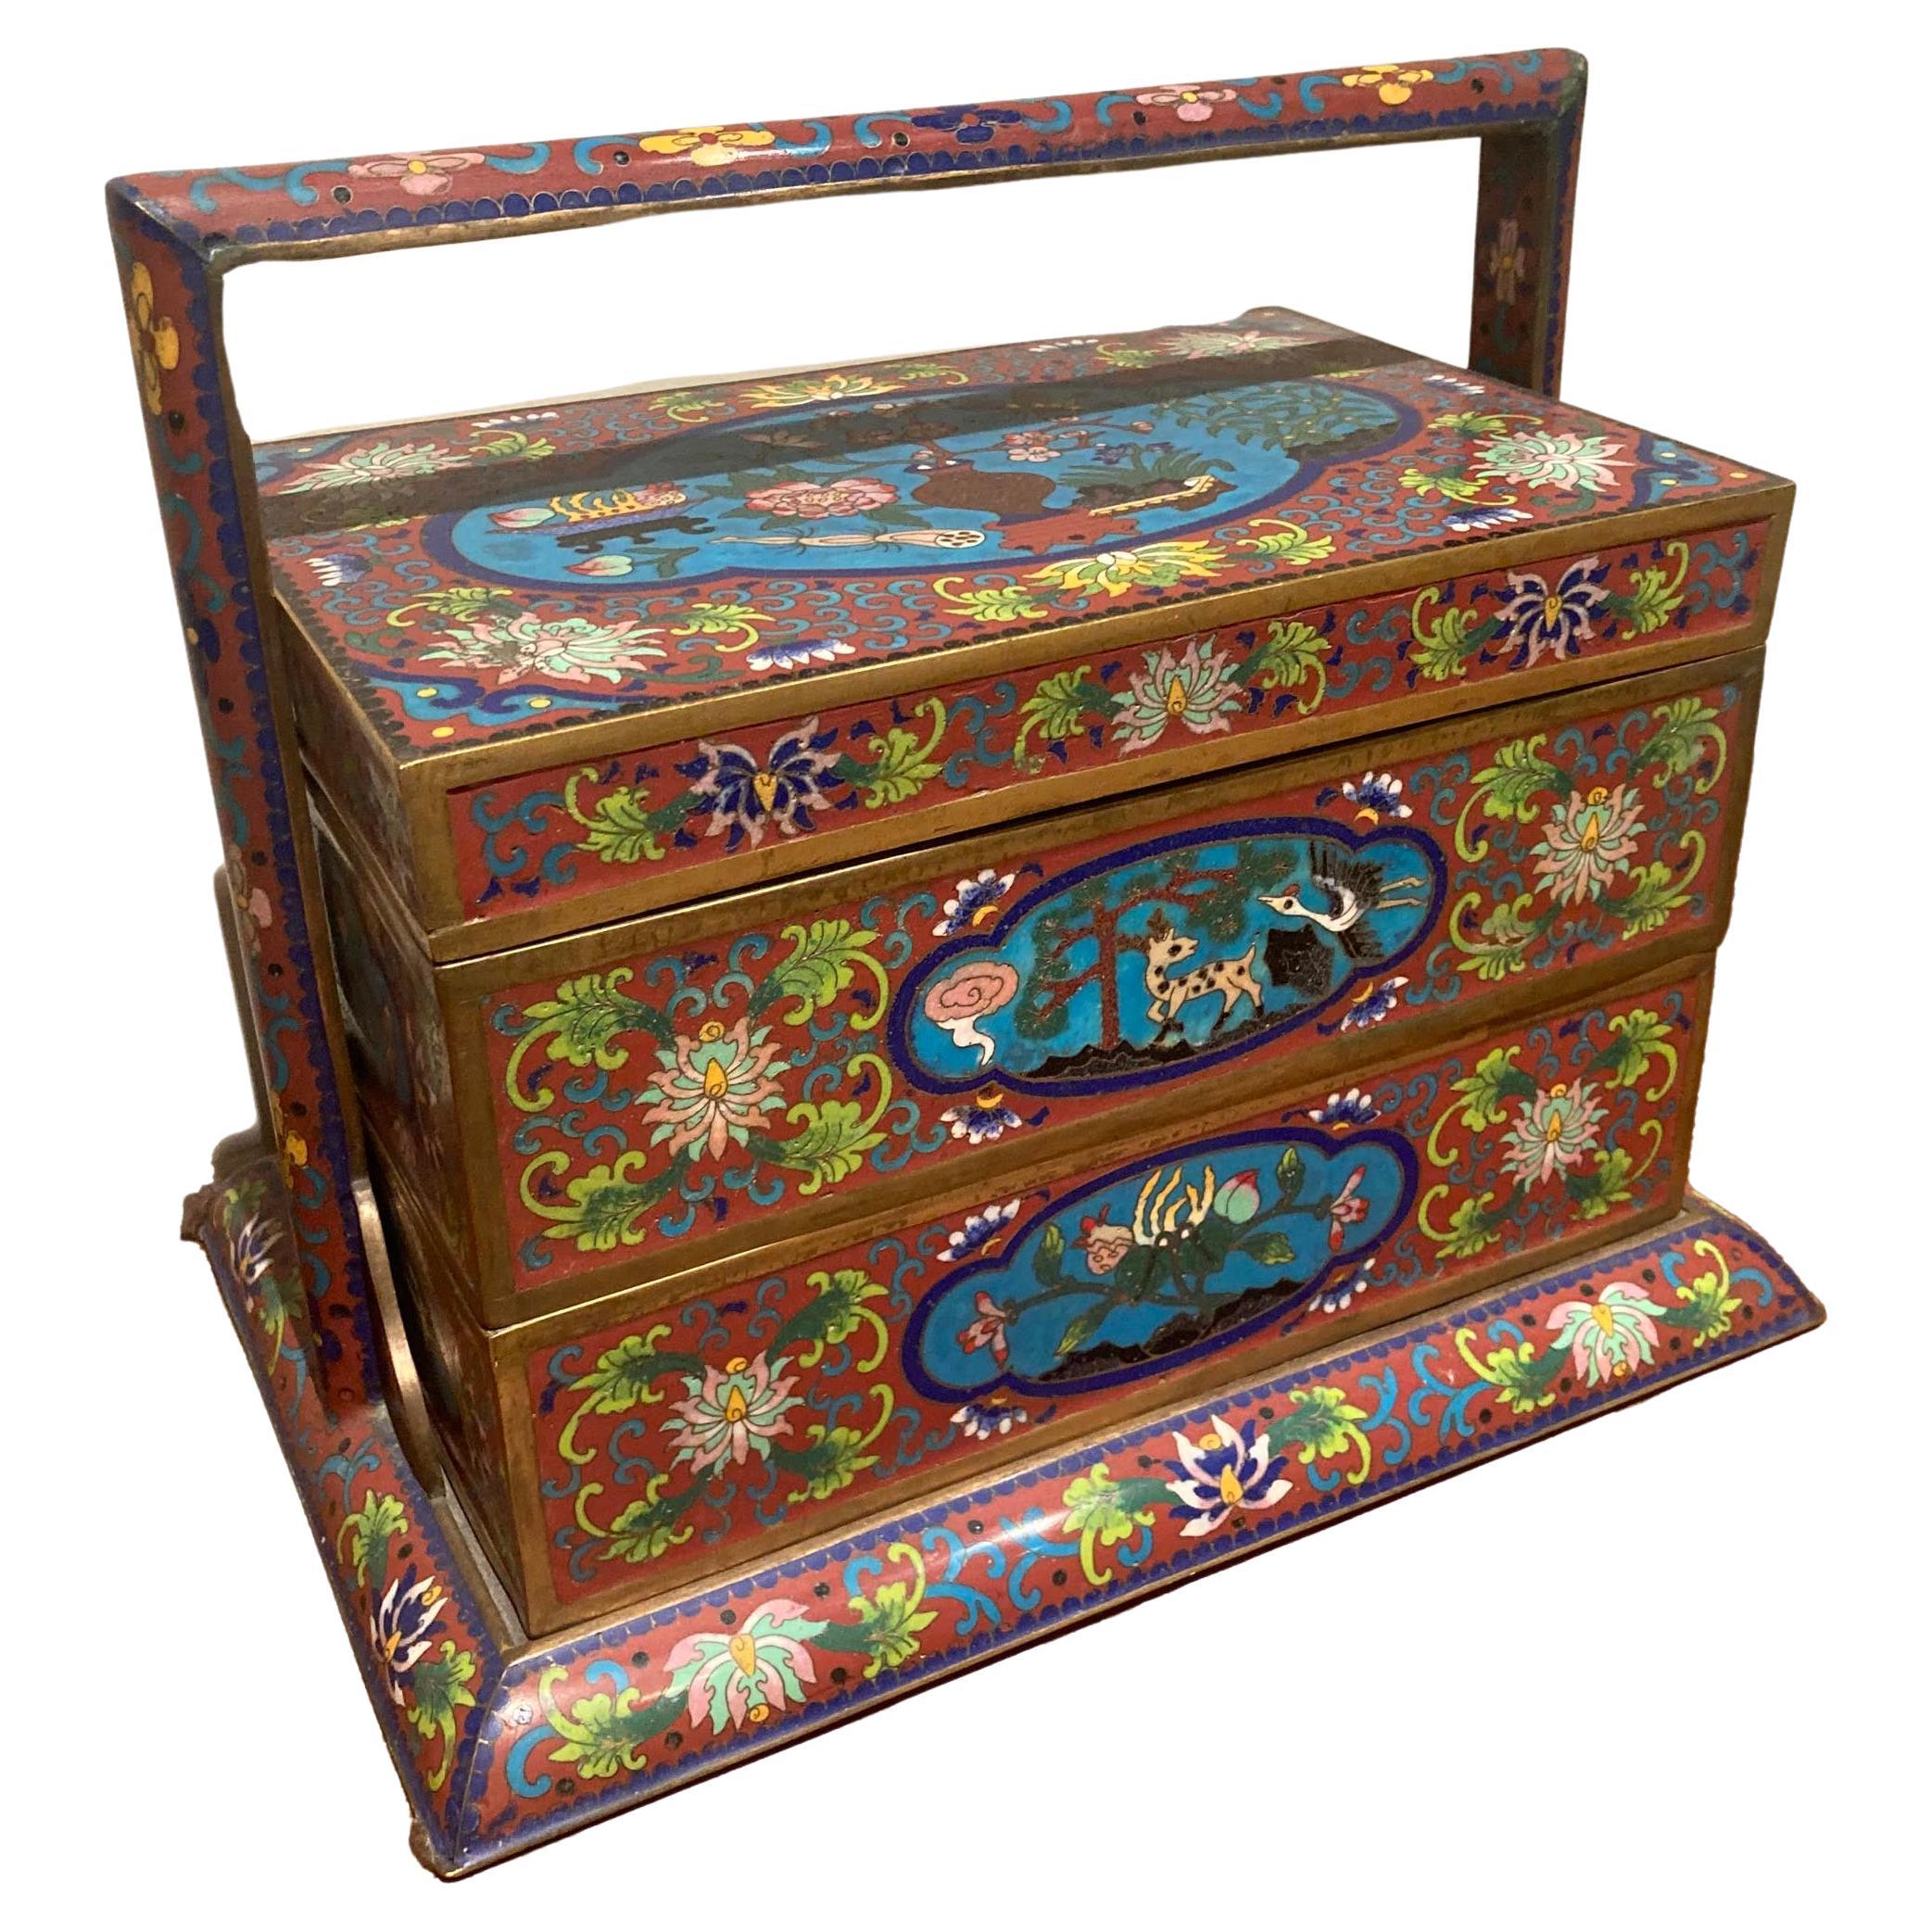 3-Tier Cloisonne Chinese Box with Handle